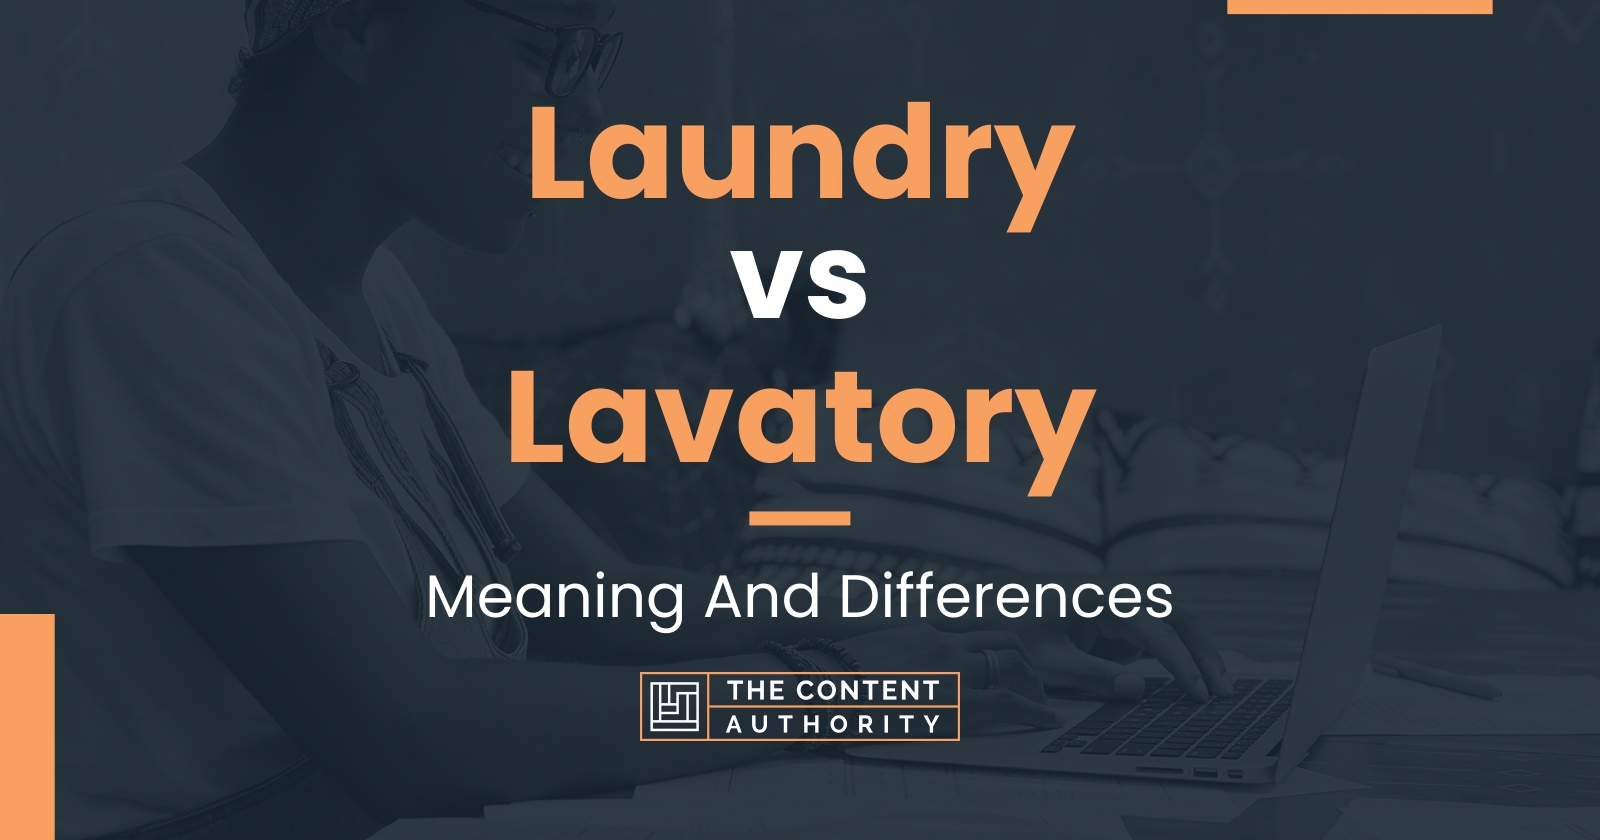 Laundry vs Lavatory: Meaning And Differences